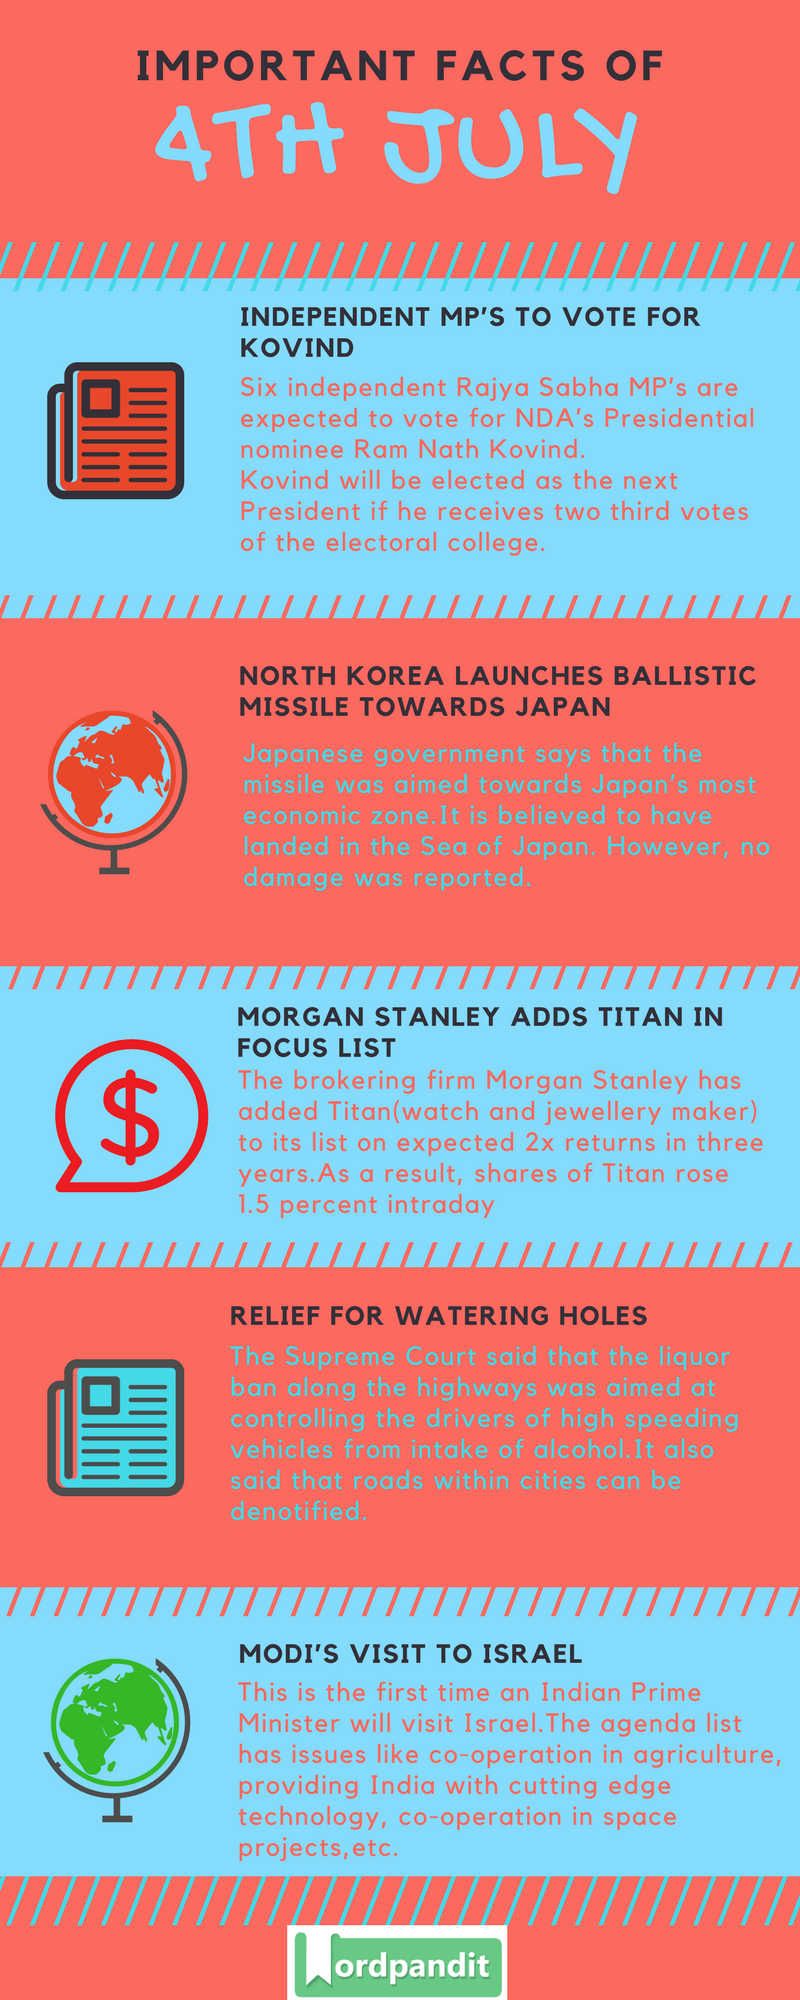 Daily-Current-Affairs-4-july-2017-and-Current-Affairs-Infographic-4-july-2017